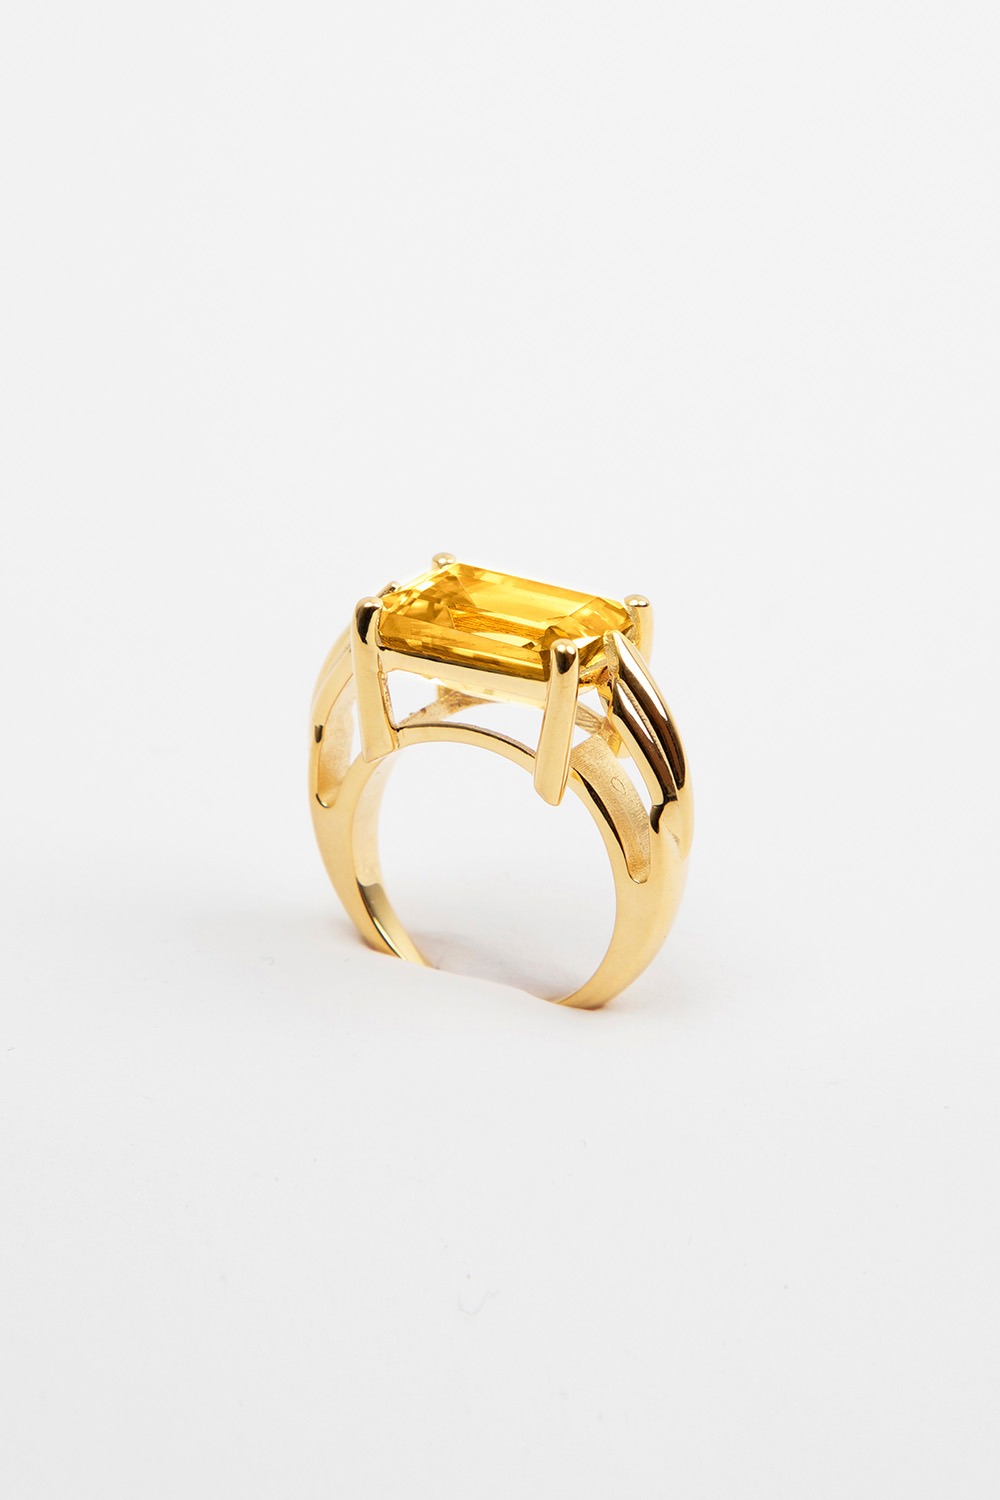 Zementine Essential Ring (Yellow)